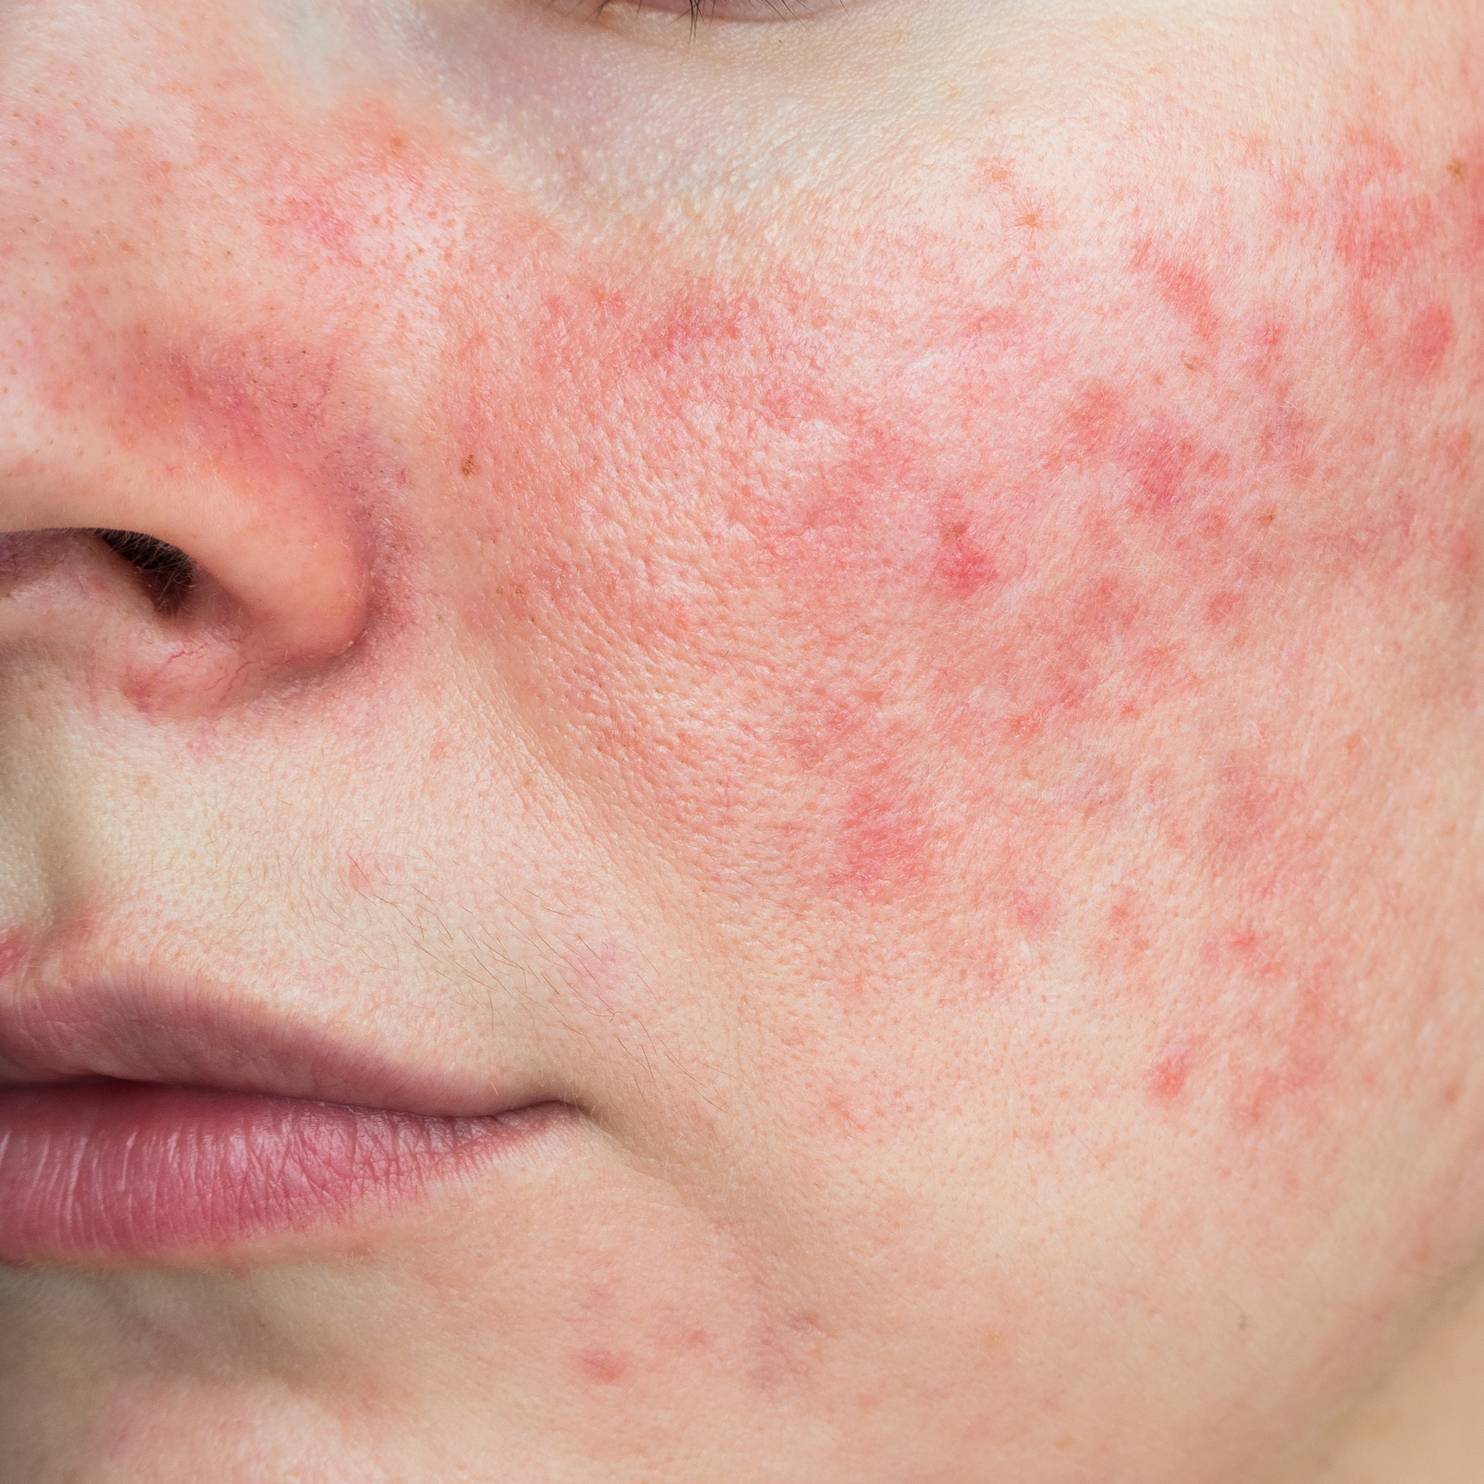 A photo of a persons face with rosacea, as evident my red patches of skin.